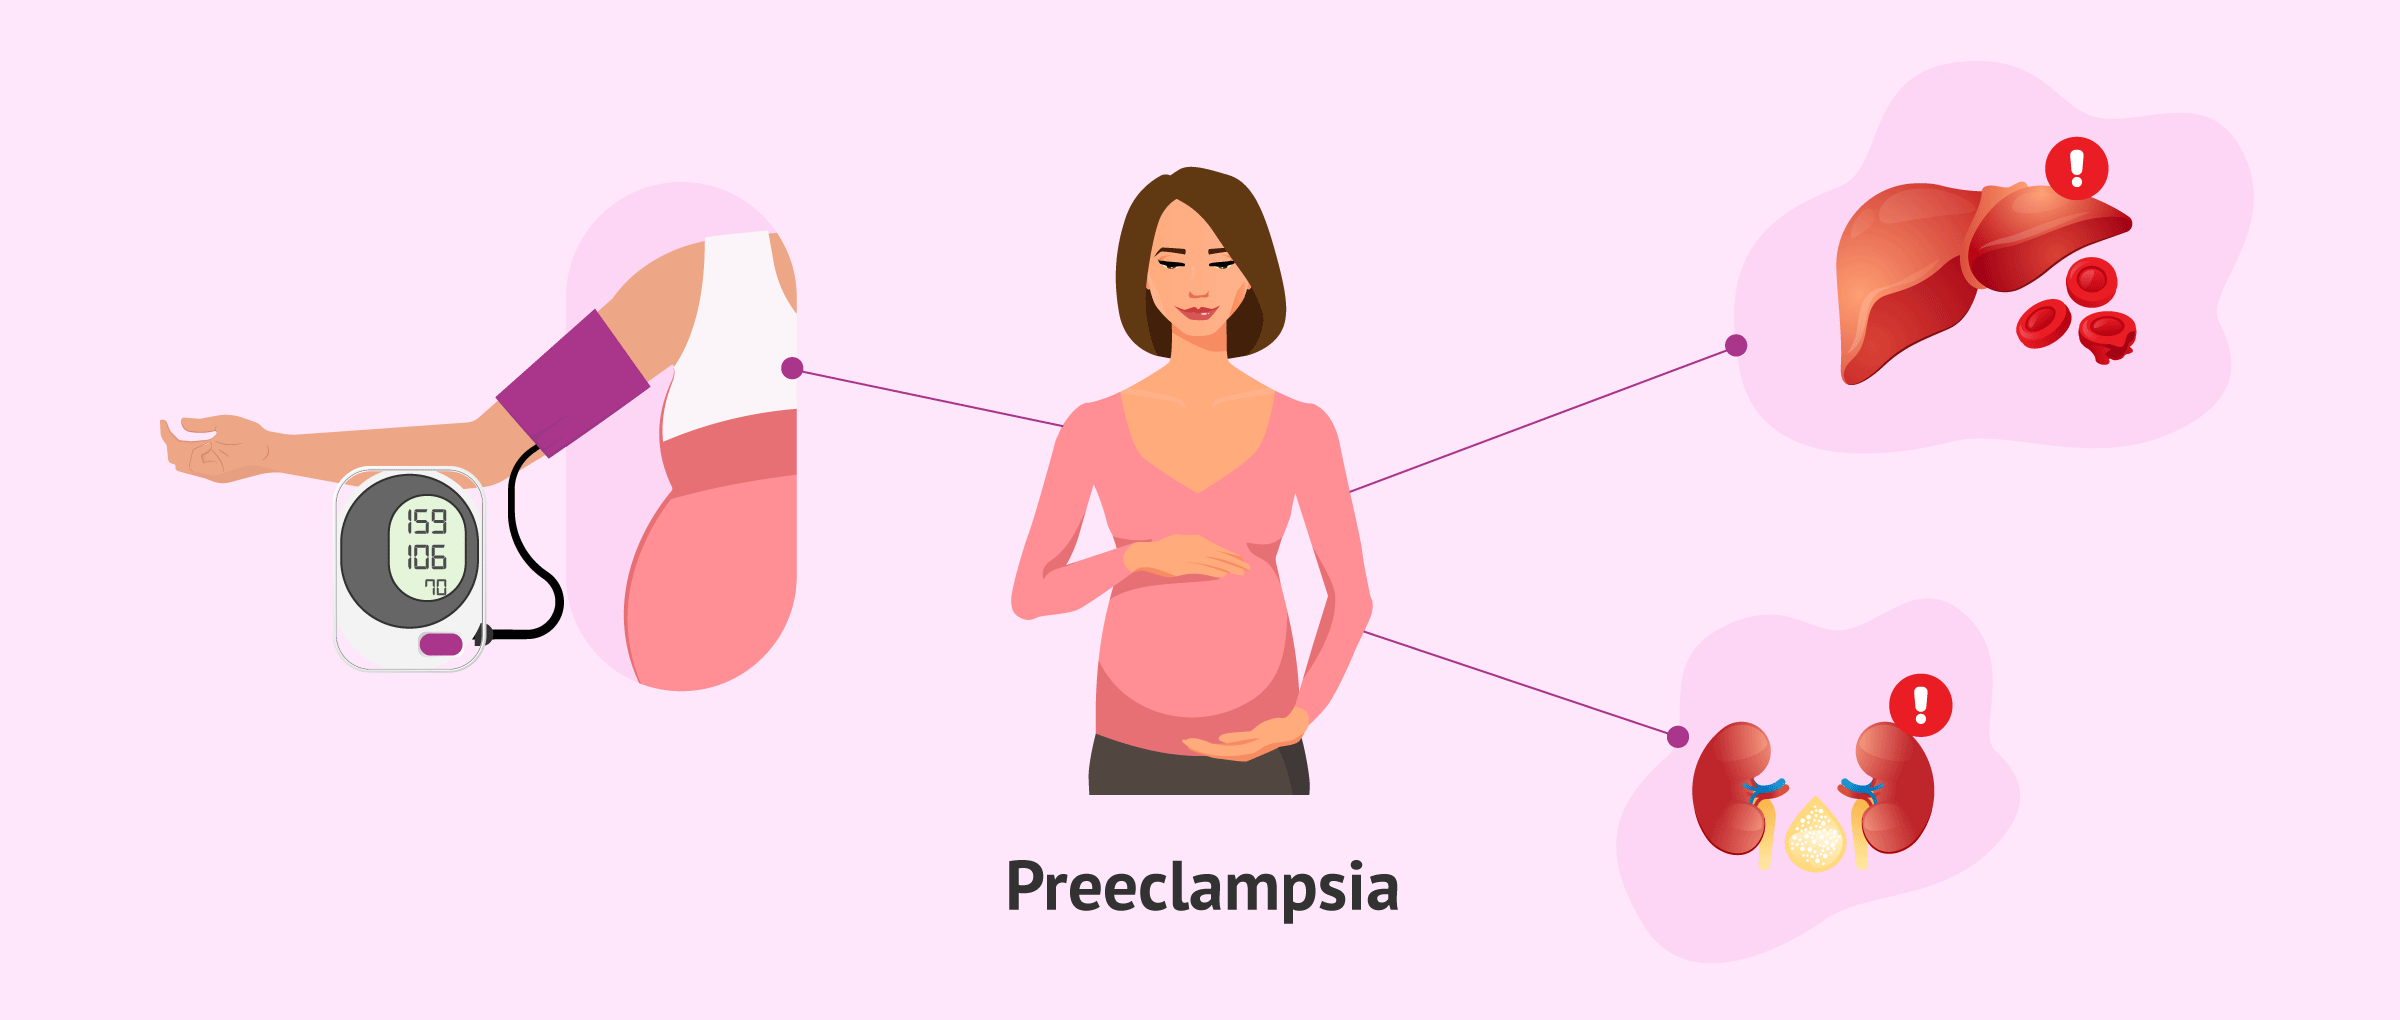 What is preeclampsia?